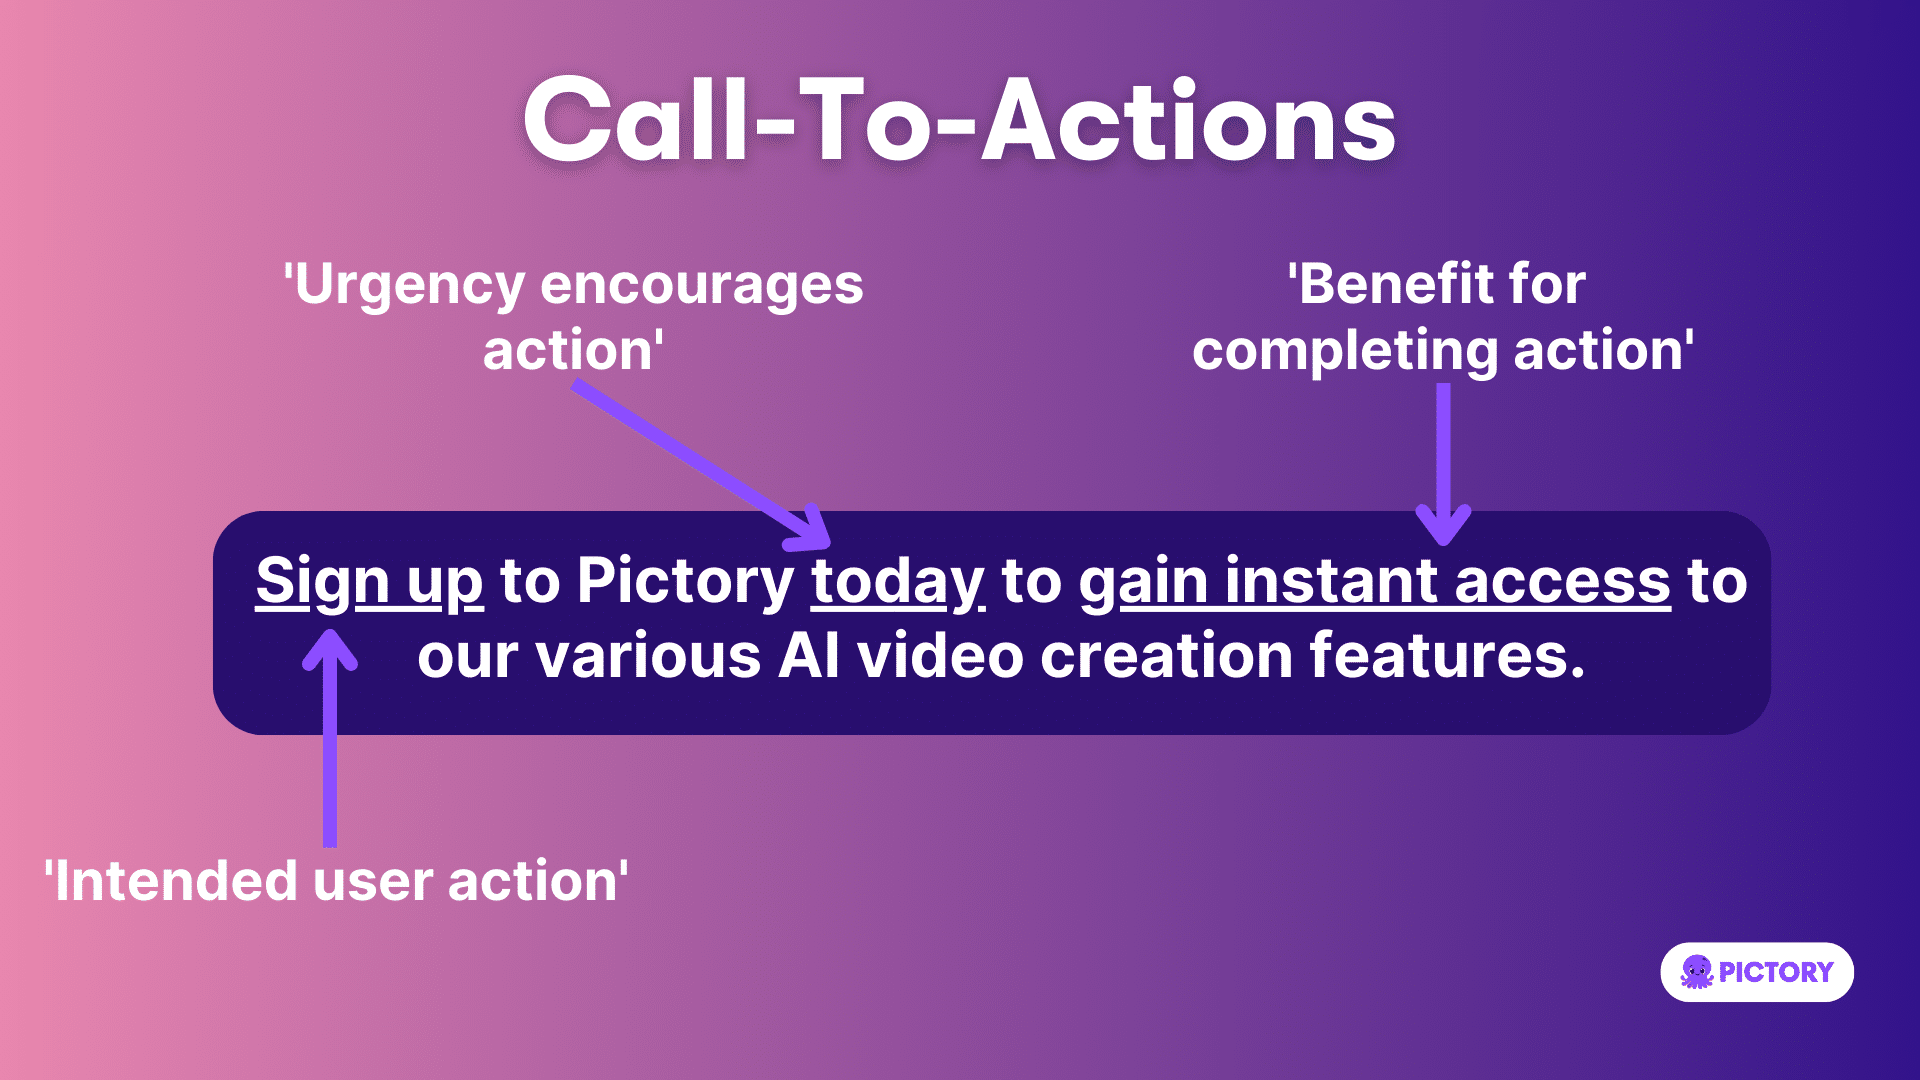 Calls to Action infographic